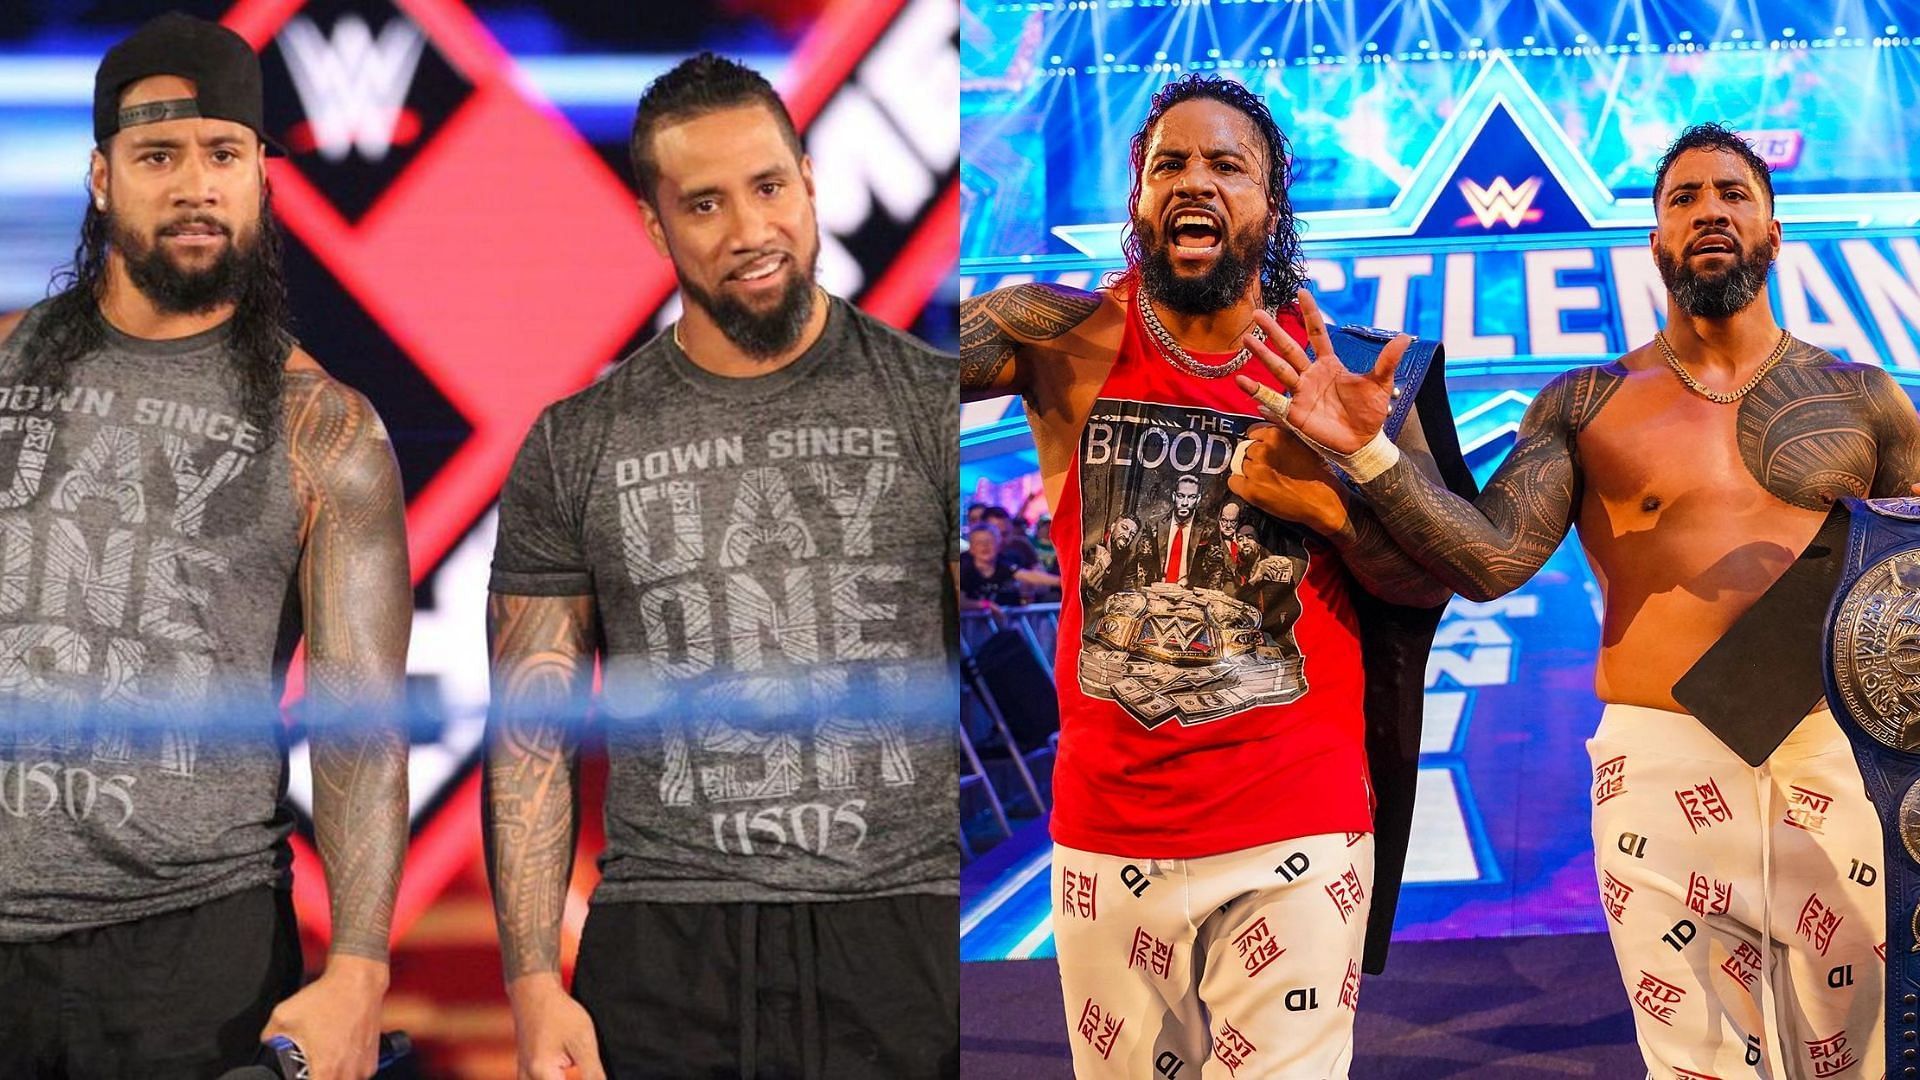 The Usos were involved in a hilarious segment back in 2019